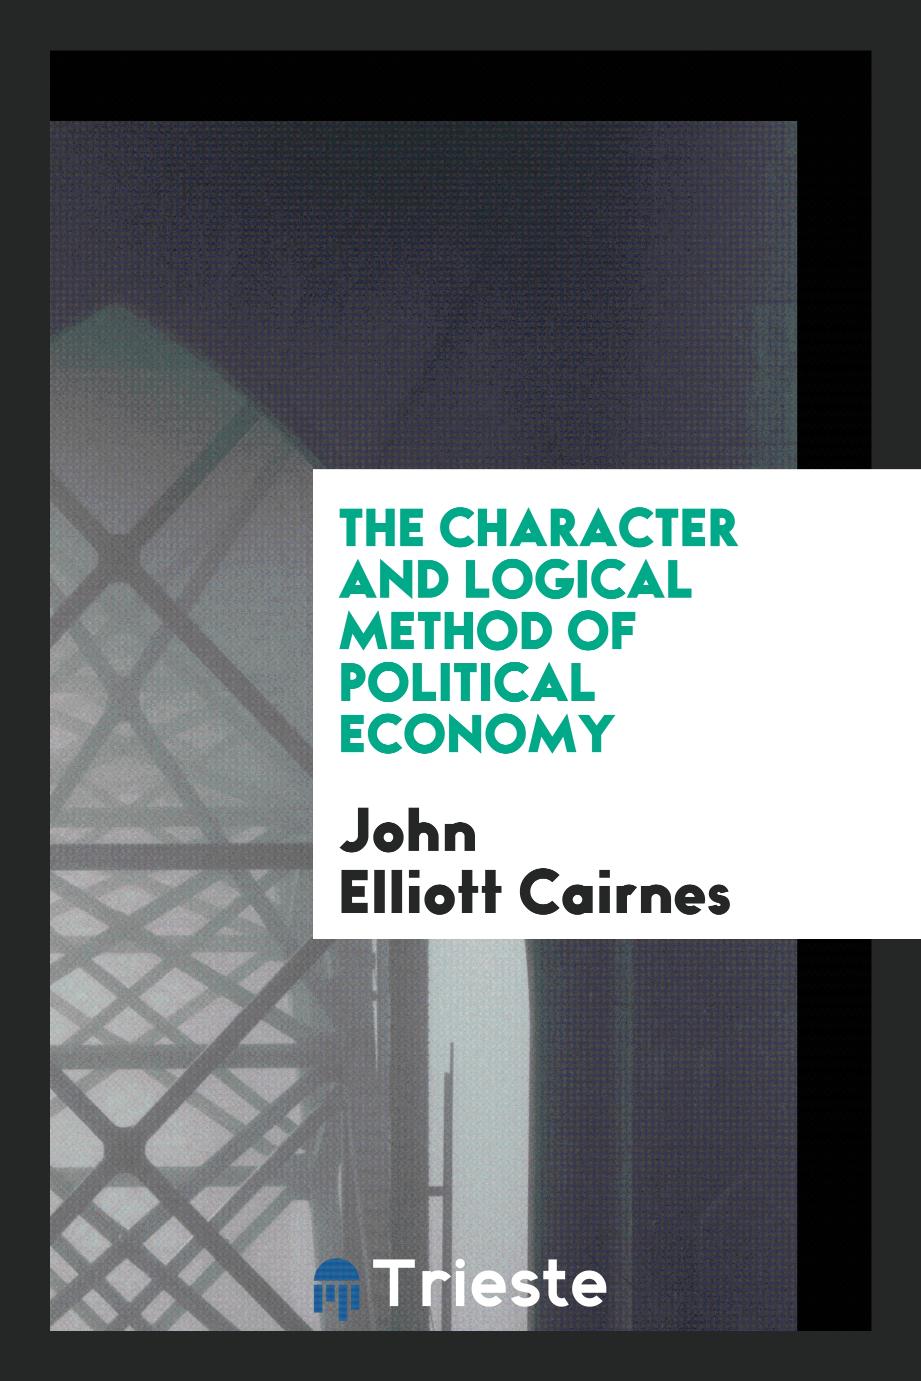 The character and logical method of political economy